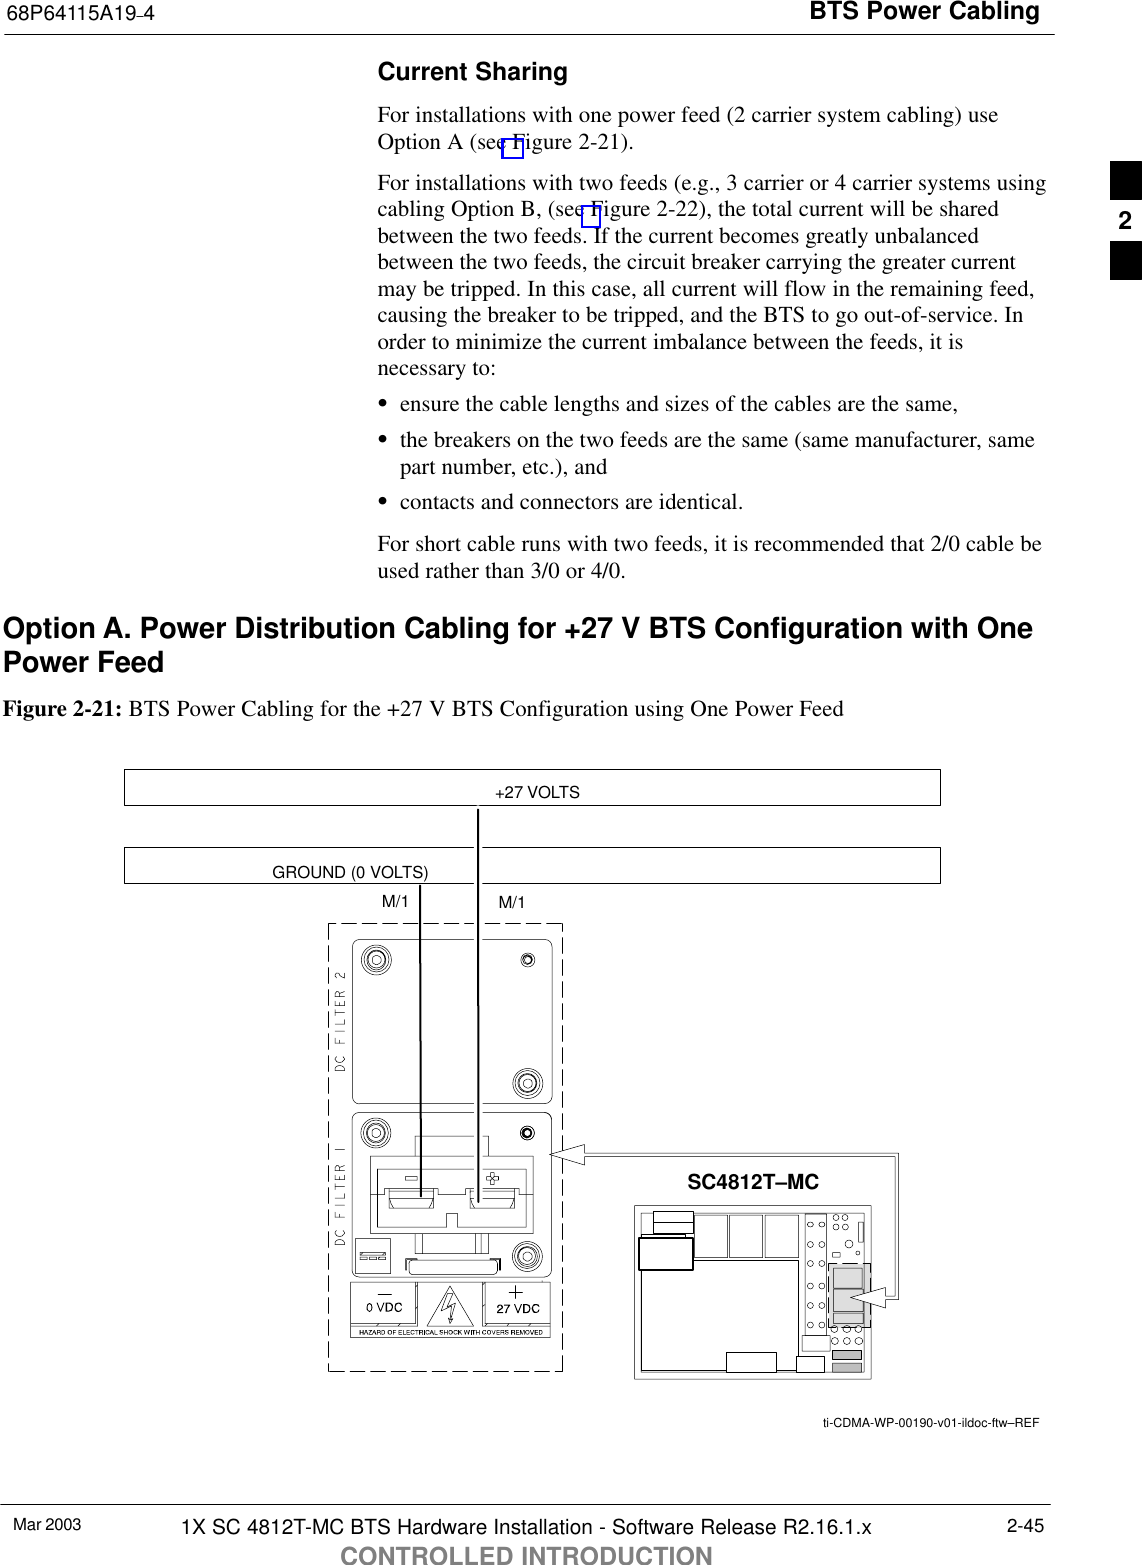 BTS Power Cabling68P64115A19–4Mar 2003 1X SC 4812T-MC BTS Hardware Installation - Software Release R2.16.1.xCONTROLLED INTRODUCTION2-45Current SharingFor installations with one power feed (2 carrier system cabling) useOption A (see Figure 2-21).For installations with two feeds (e.g., 3 carrier or 4 carrier systems usingcabling Option B, (see Figure 2-22), the total current will be sharedbetween the two feeds. If the current becomes greatly unbalancedbetween the two feeds, the circuit breaker carrying the greater currentmay be tripped. In this case, all current will flow in the remaining feed,causing the breaker to be tripped, and the BTS to go out-of-service. Inorder to minimize the current imbalance between the feeds, it isnecessary to:Sensure the cable lengths and sizes of the cables are the same,Sthe breakers on the two feeds are the same (same manufacturer, samepart number, etc.), andScontacts and connectors are identical.For short cable runs with two feeds, it is recommended that 2/0 cable beused rather than 3/0 or 4/0.Option A. Power Distribution Cabling for +27 V BTS Configuration with OnePower FeedFigure 2-21: BTS Power Cabling for the +27 V BTS Configuration using One Power Feed+27 VOLTSGROUND (0 VOLTS)M/1M/1SC4812T–MCti-CDMA-WP-00190-v01-ildoc-ftw–REF2